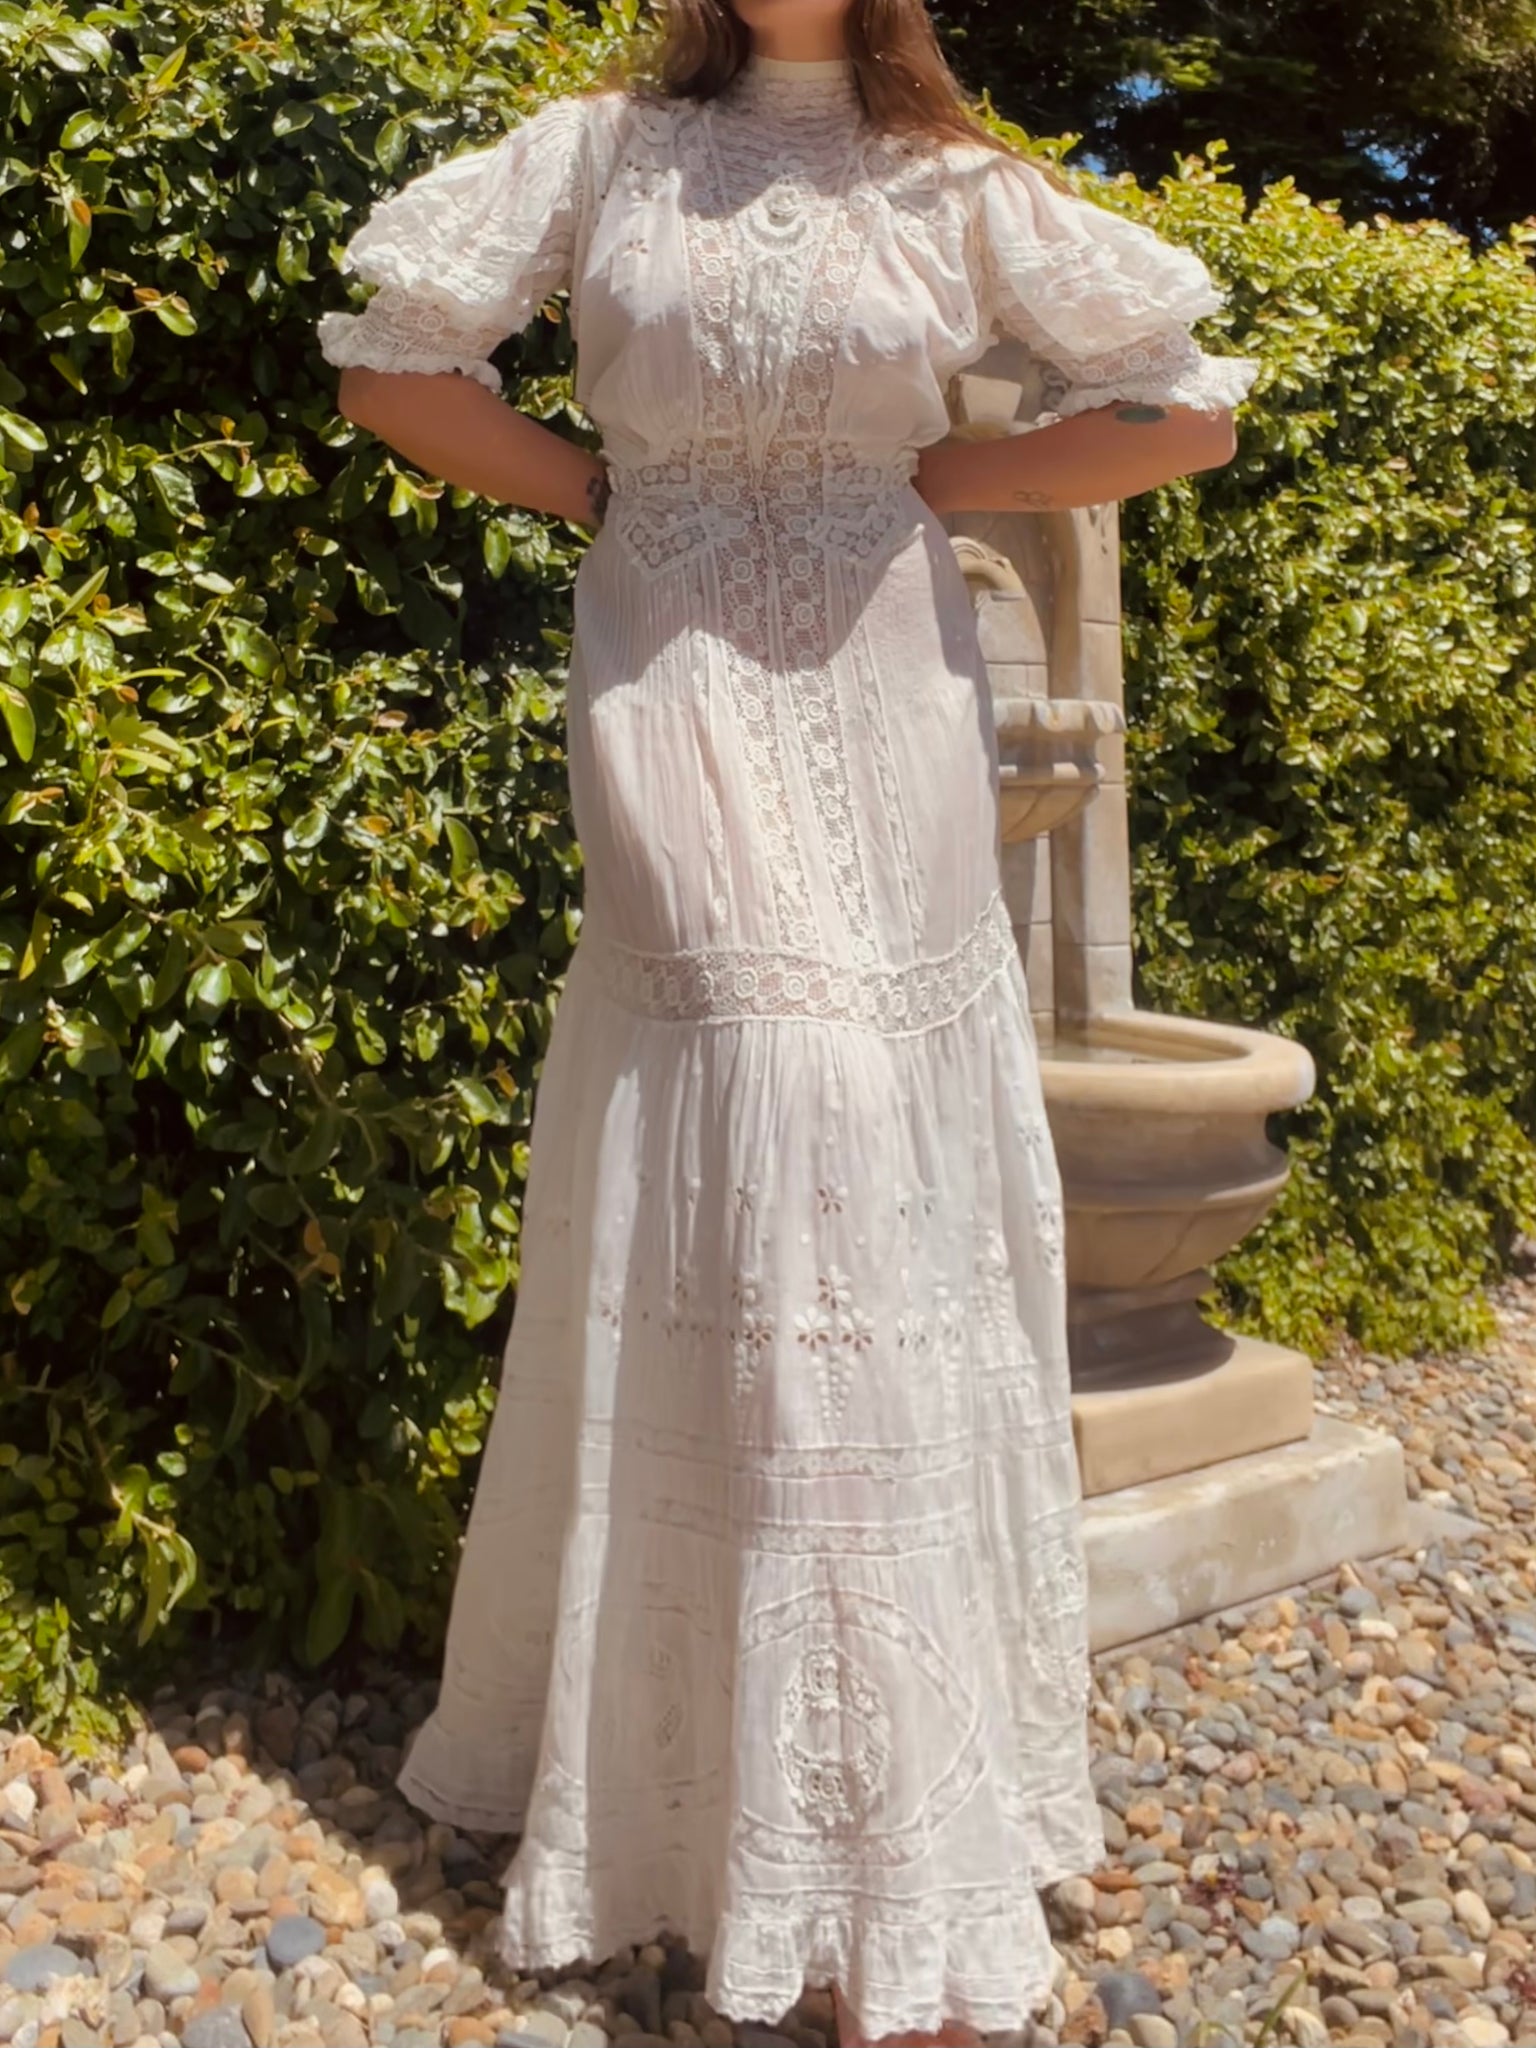 Early 1900s Fine Cotton & Lace High Neck Wedding Dress